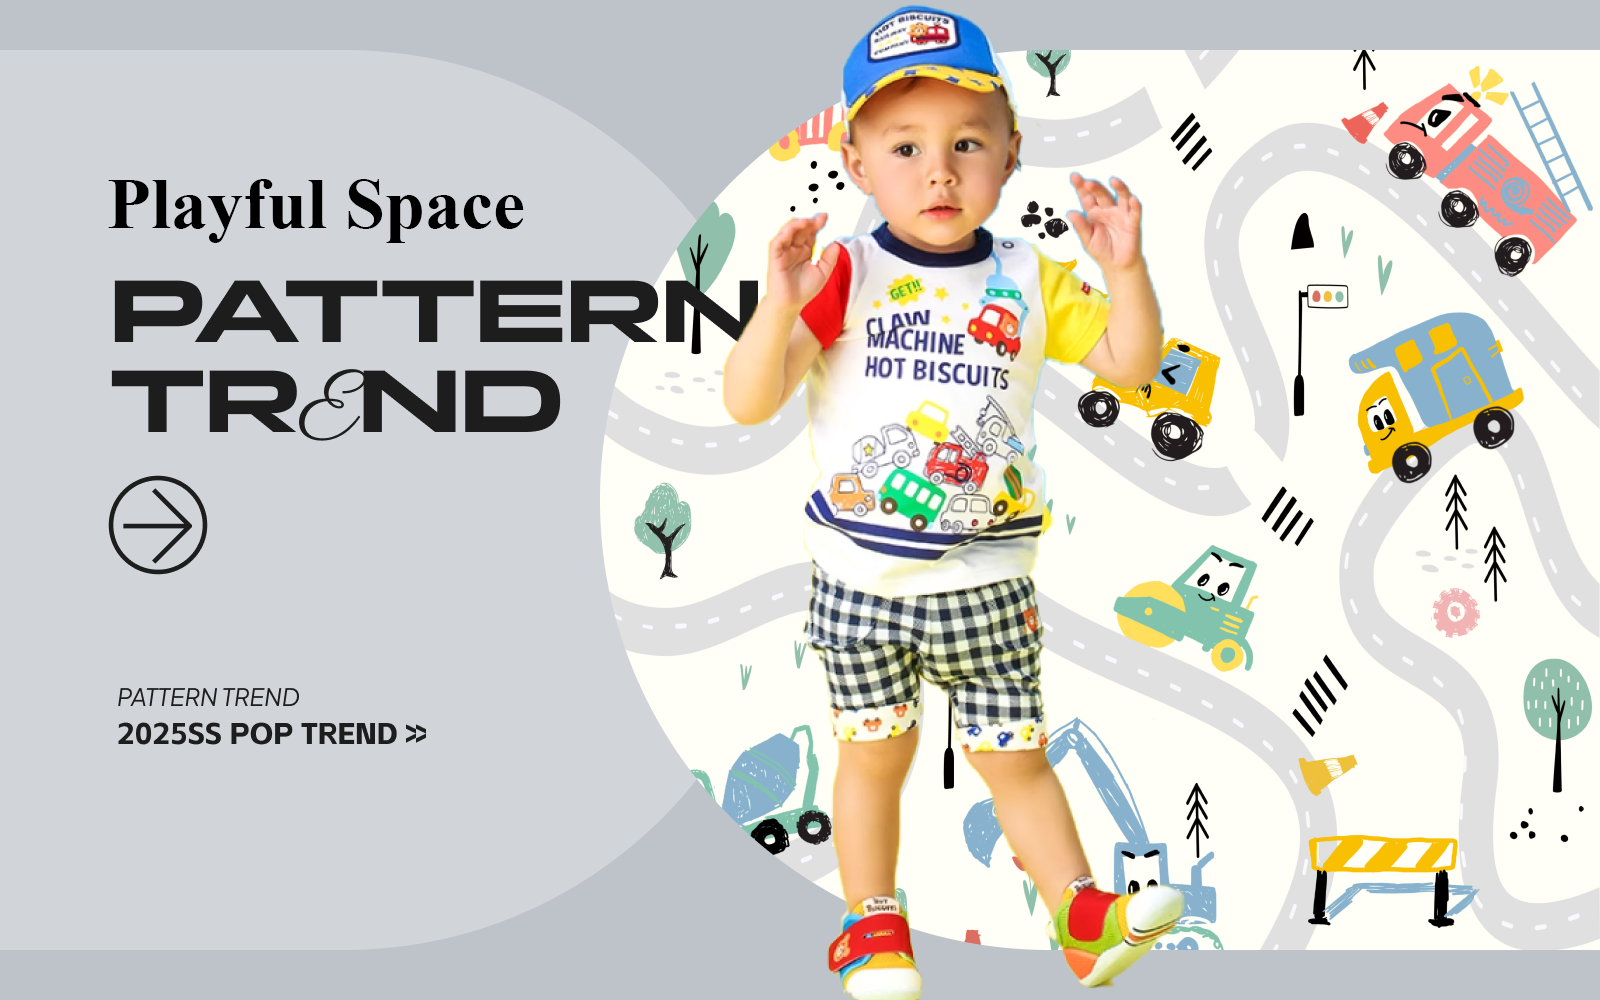 Playful Space -- The Pattern Trend for Kidswear